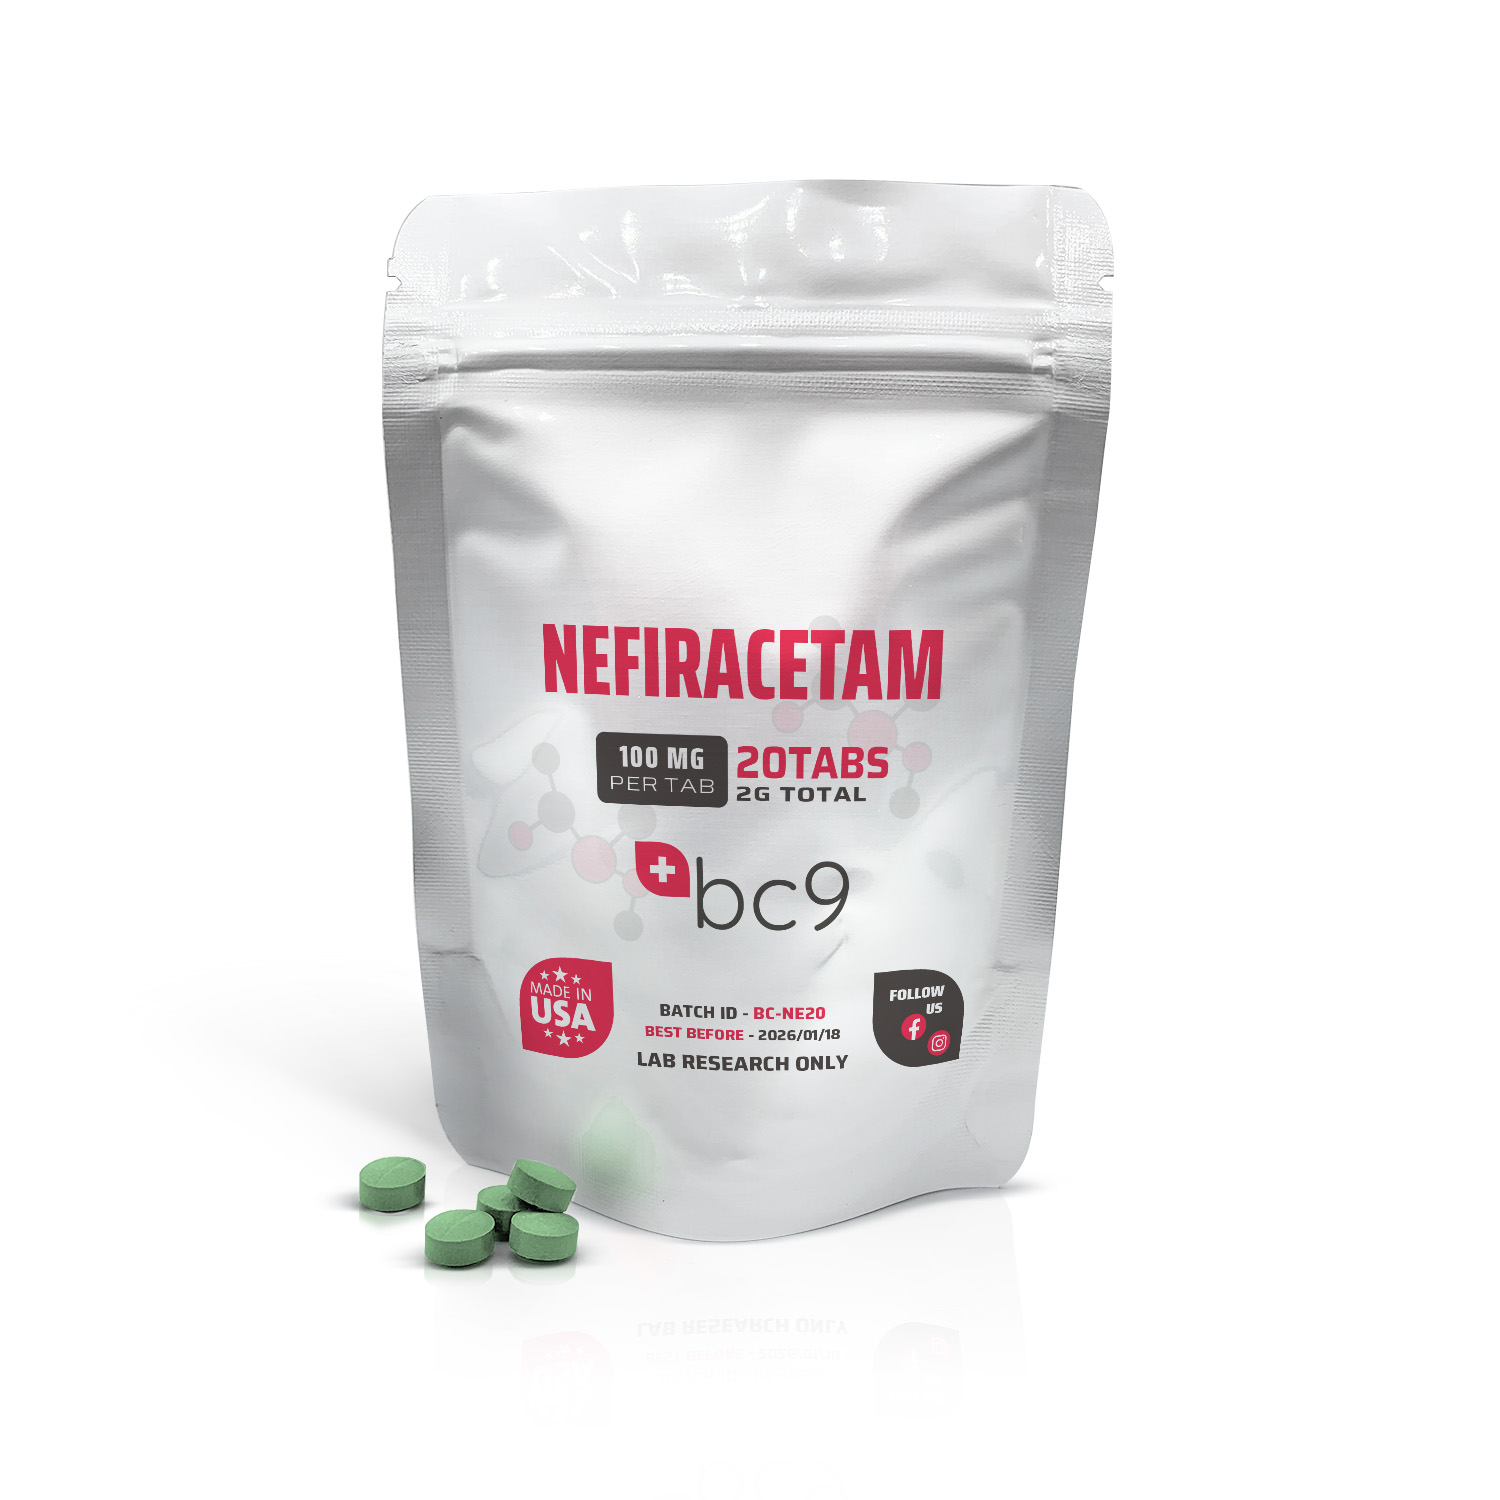 Nefiracetam Tablets For Sale | Fast Shipping | BC9.org